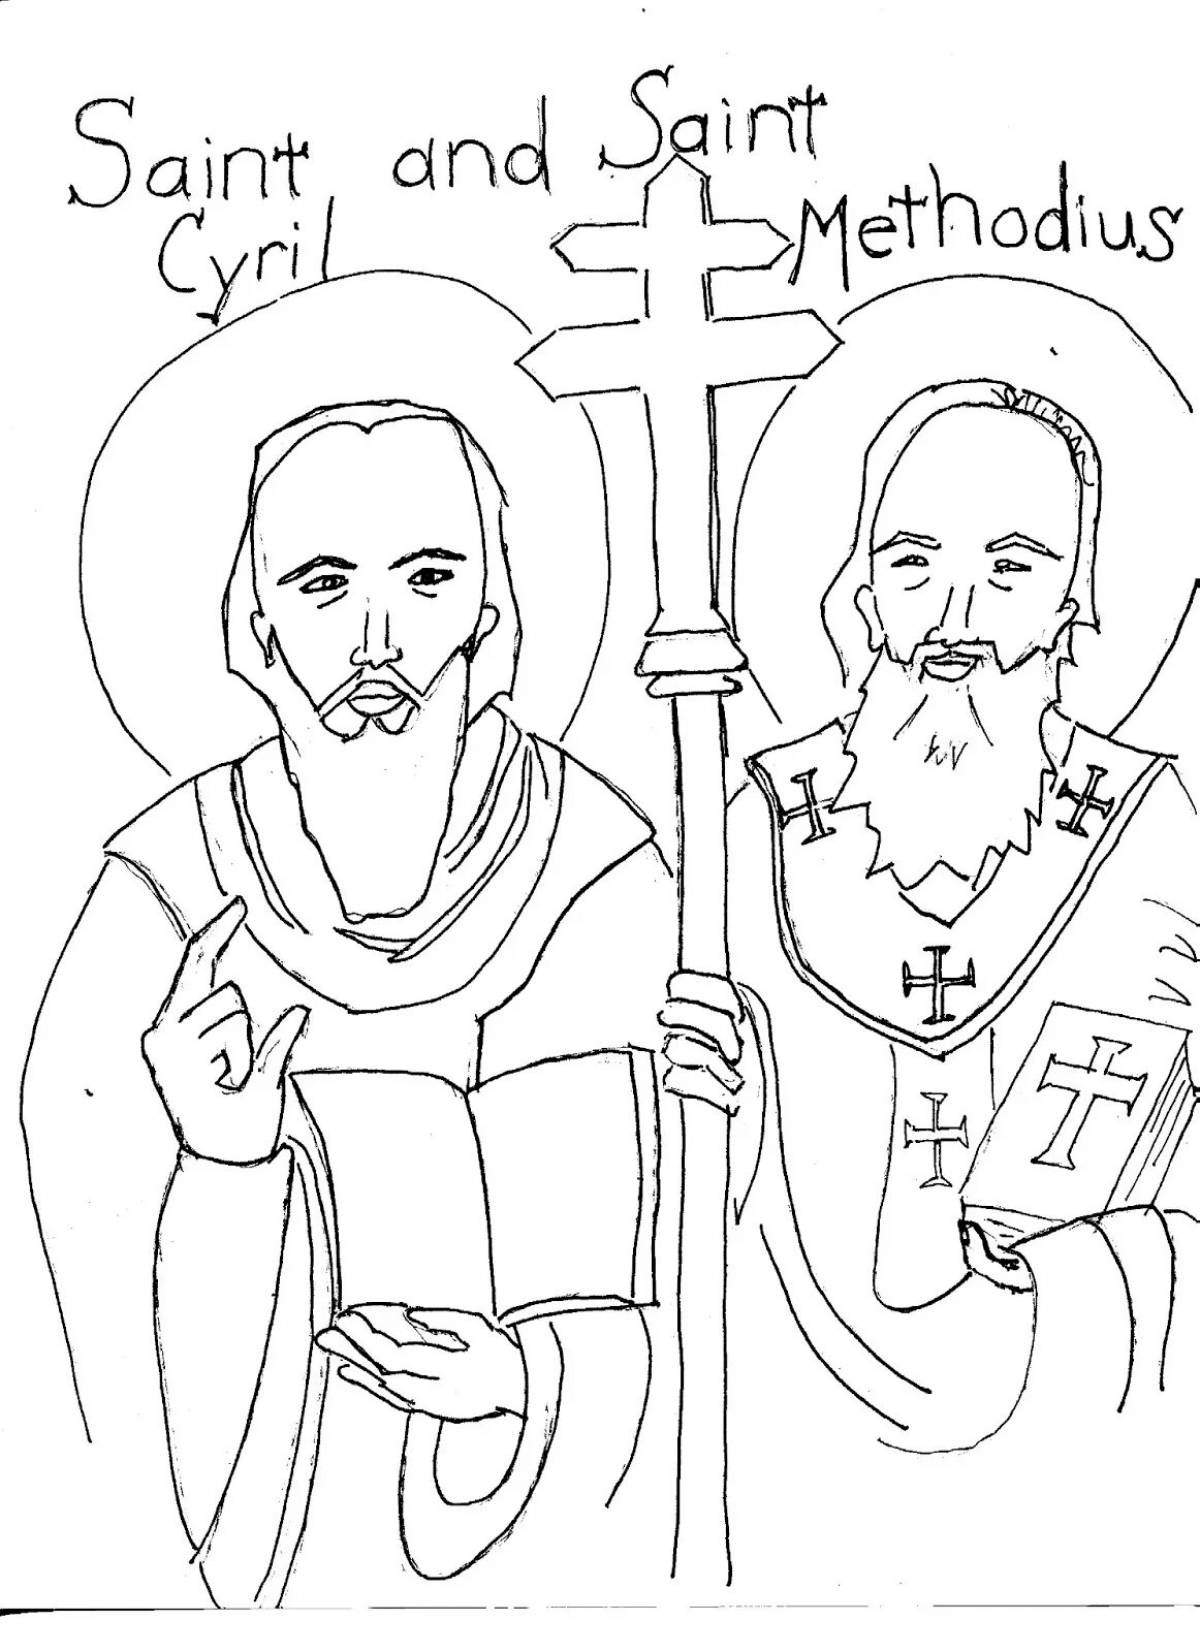 Cyril and methodius for children #3